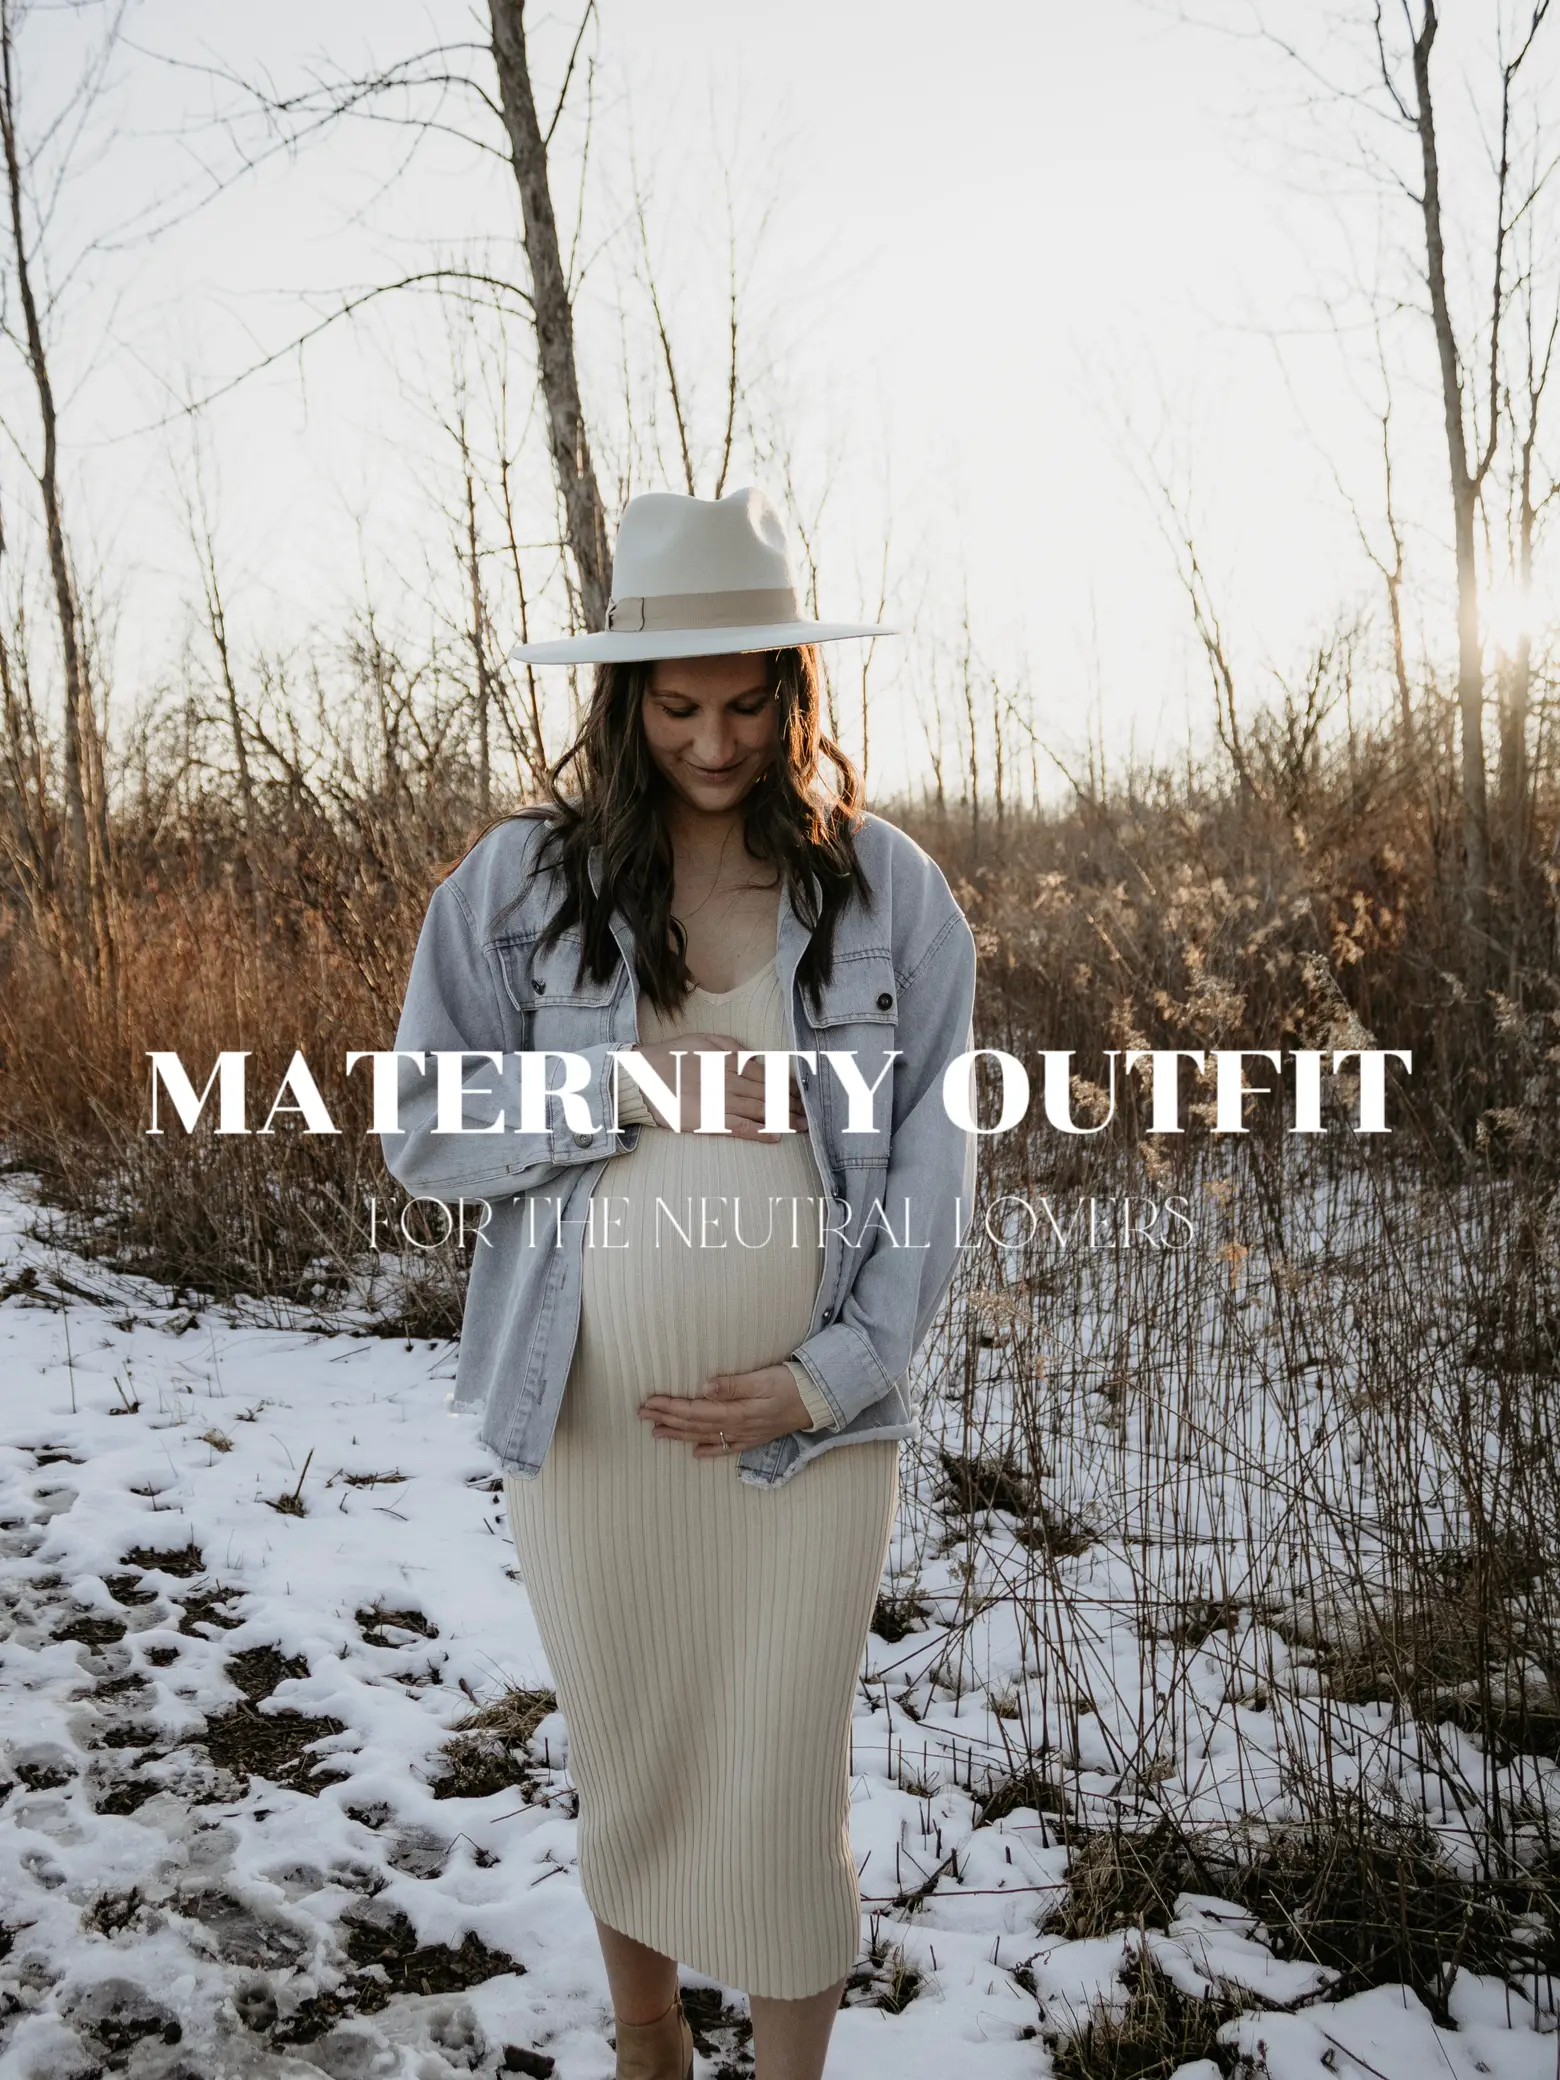 Maternity outfit inspo 🫶🏽, Gallery posted by Kendall Munch